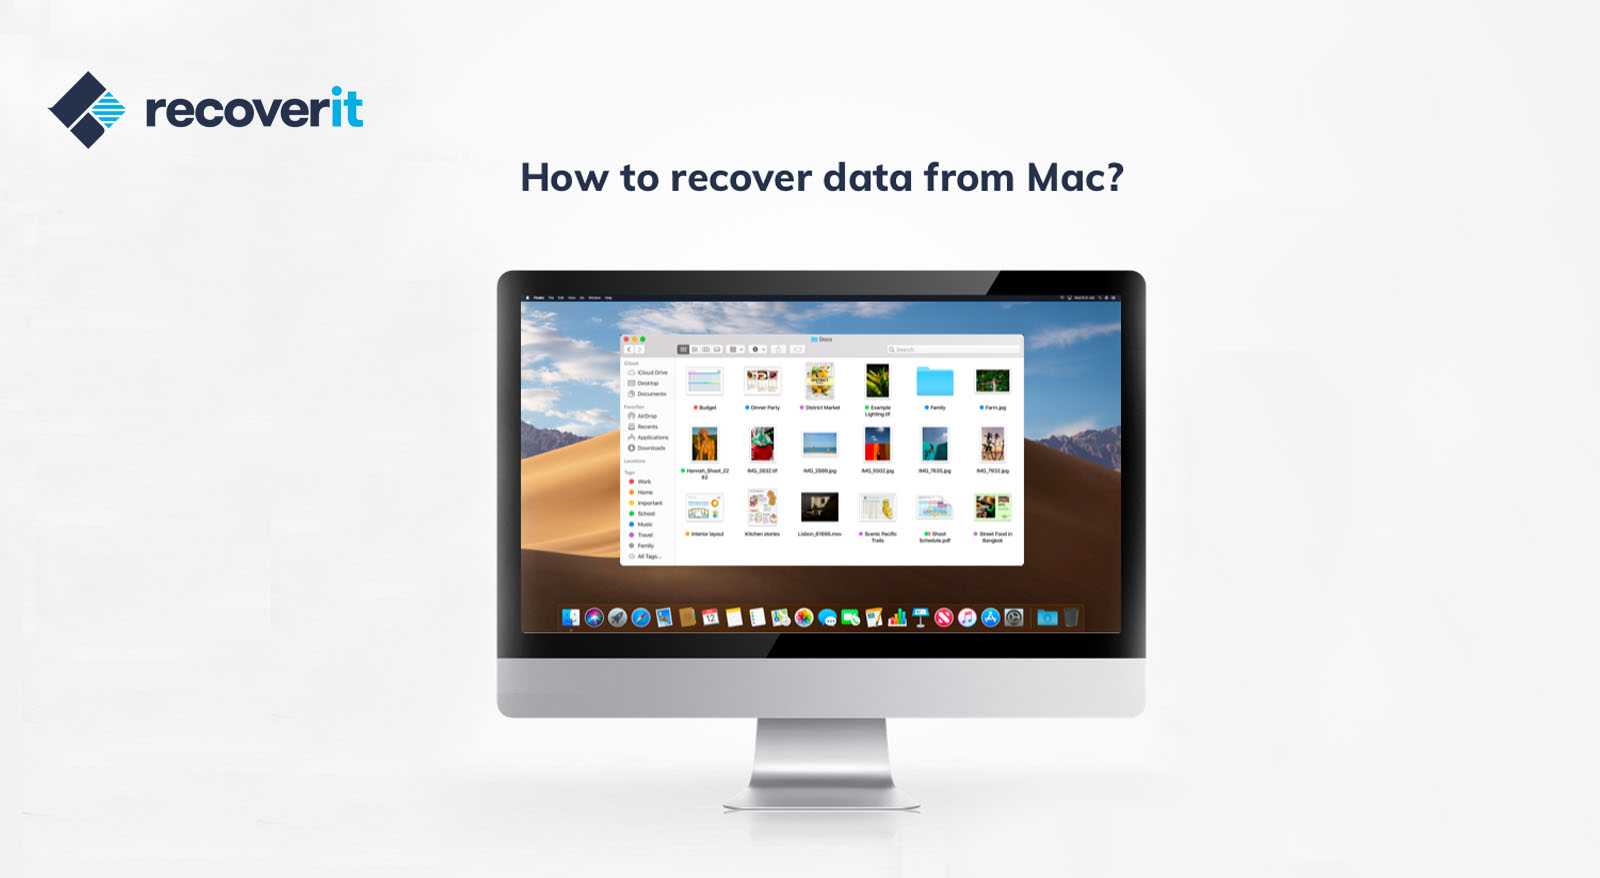 Mac data recovery is easy with Wondershares Recoverit.